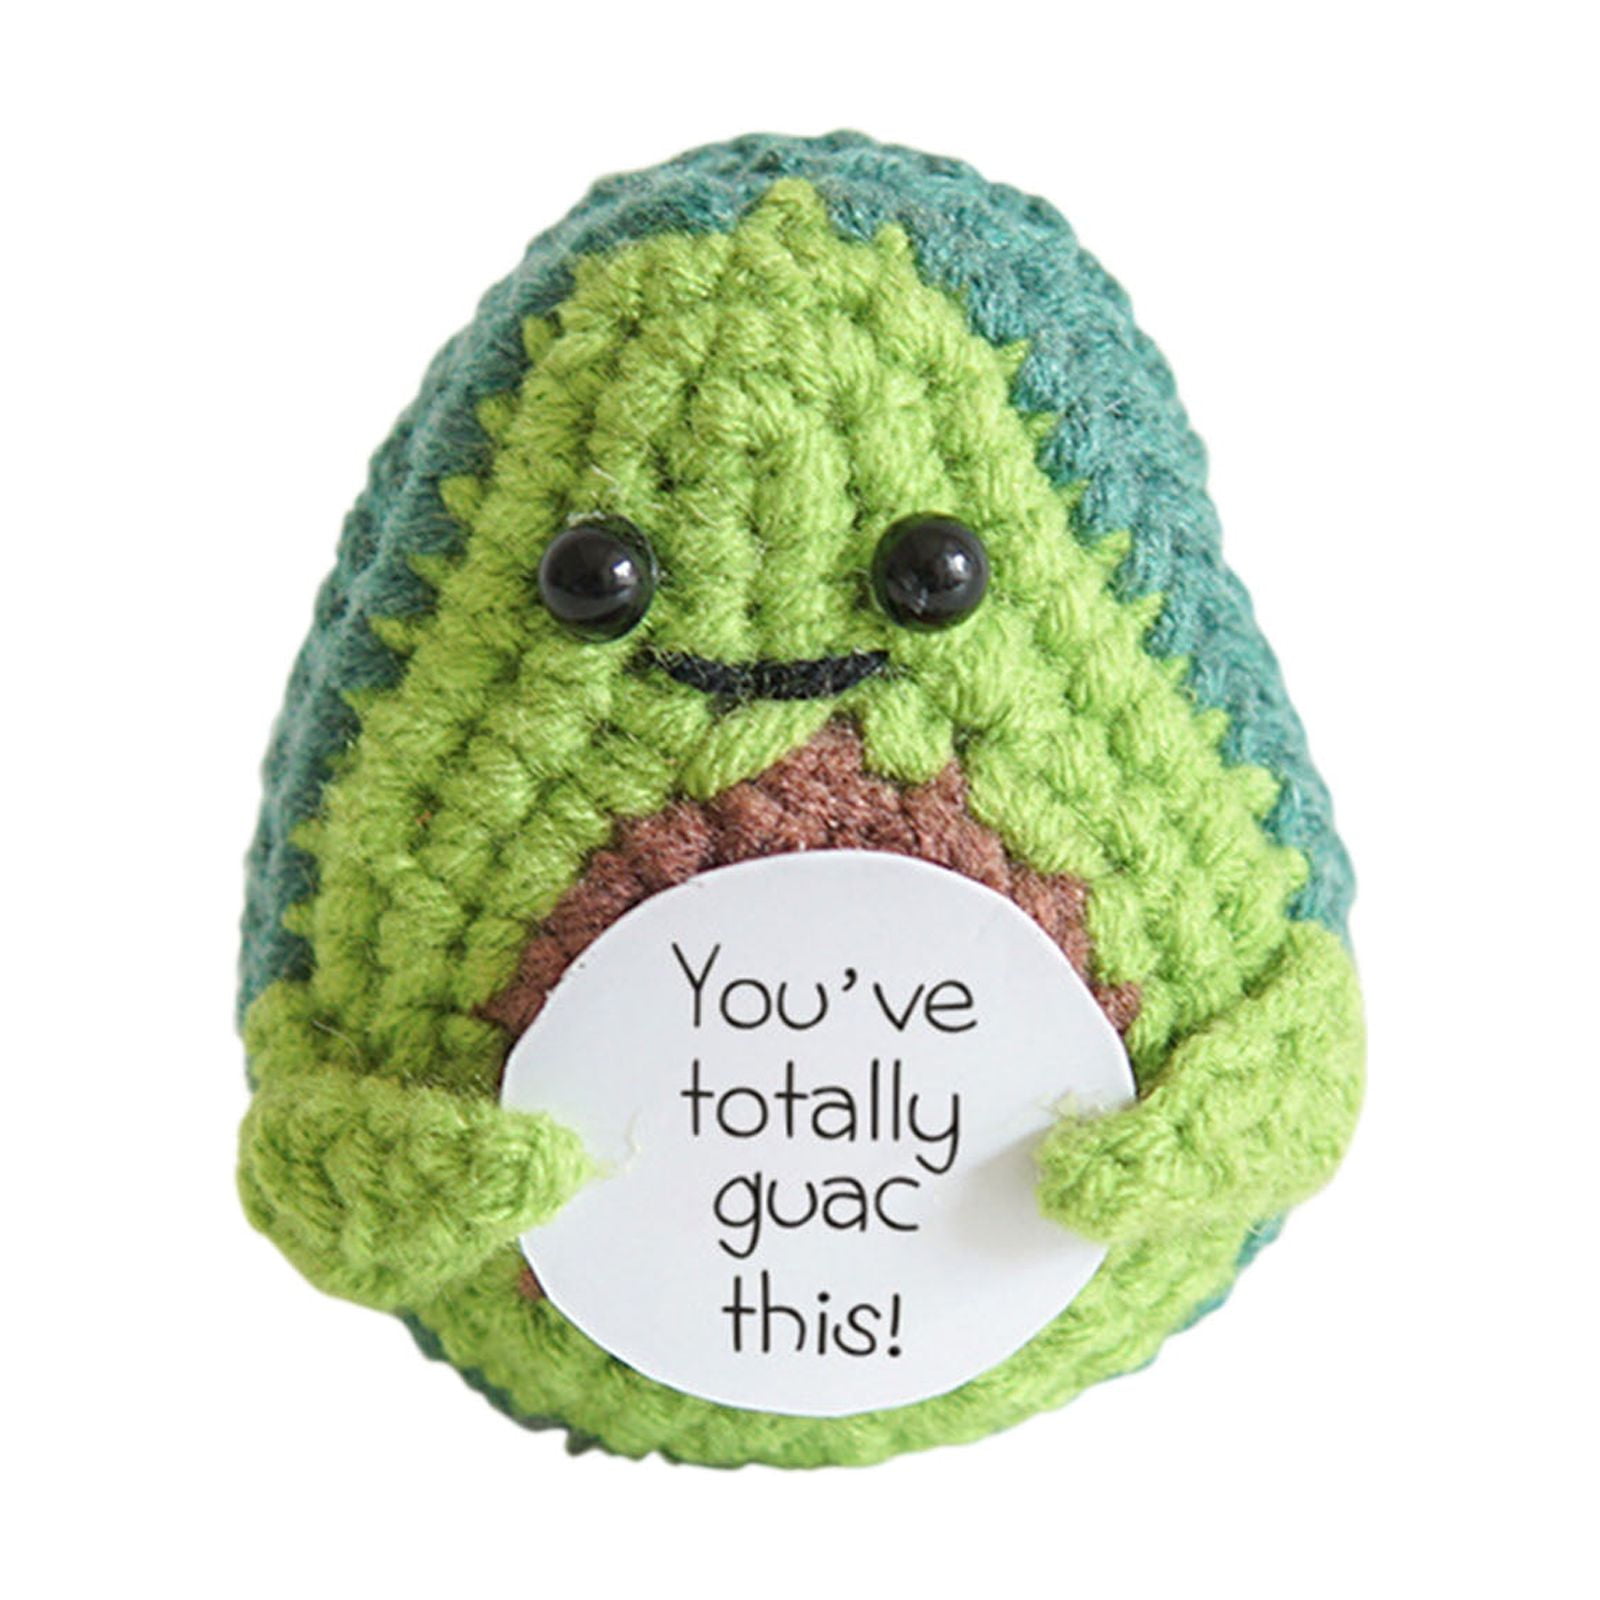 Chunky Pickle Tags~Crochet Amigurumi Emotional Support Pickle Tags~Set of 5  or 7~Punny Pick Me Up Pickle Patches~Faux Leather/Ready to Ship